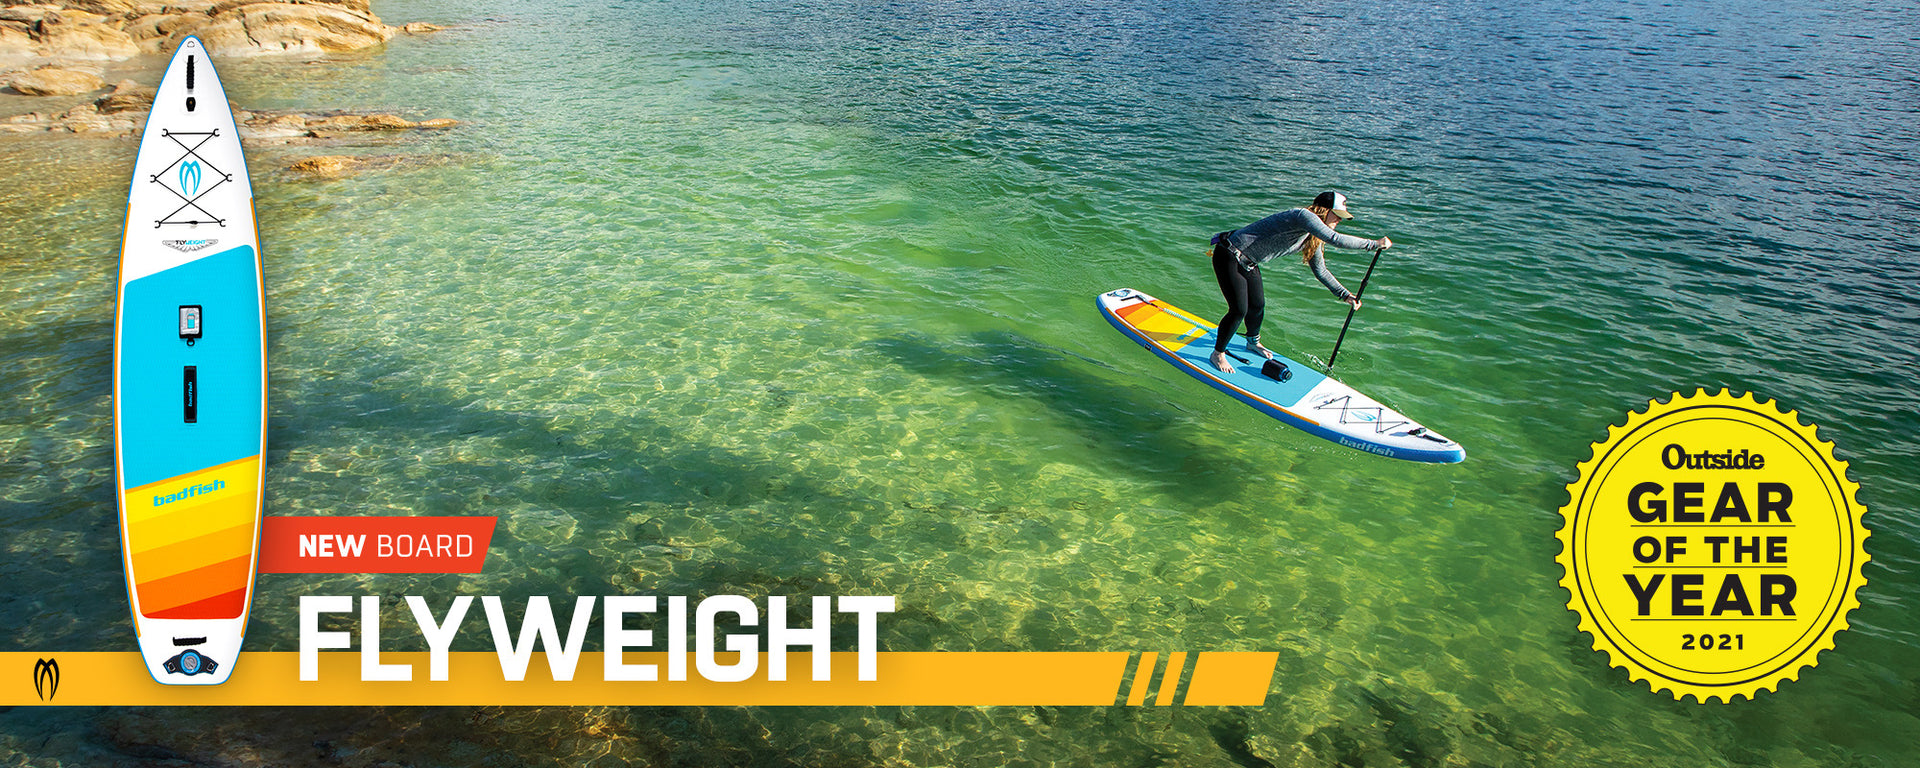 Badfish Flyweight Outside Gear of the Year Inflatable Paddle Board